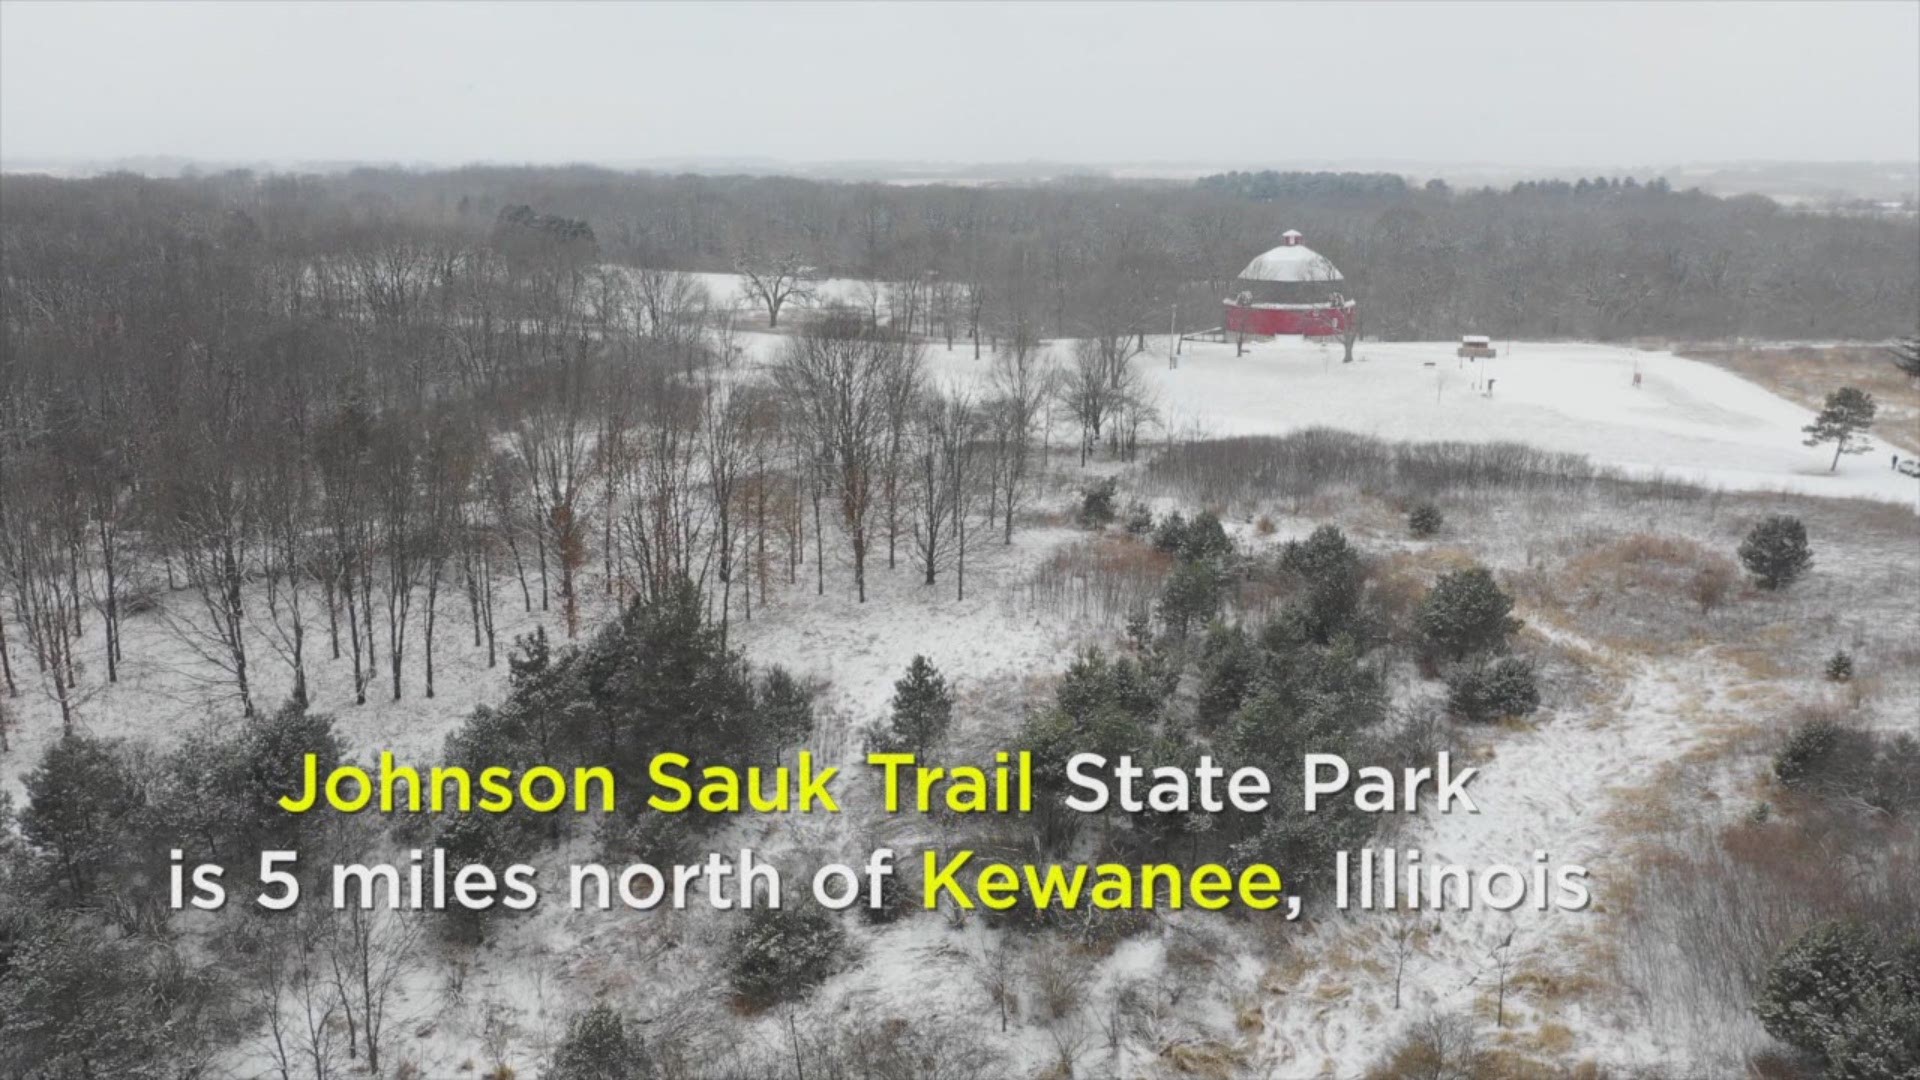 Fly away with the News Eight Drone as it takes us to Johnson Sauk Trail State Park near Kewanee, Illinois. From February 2020.